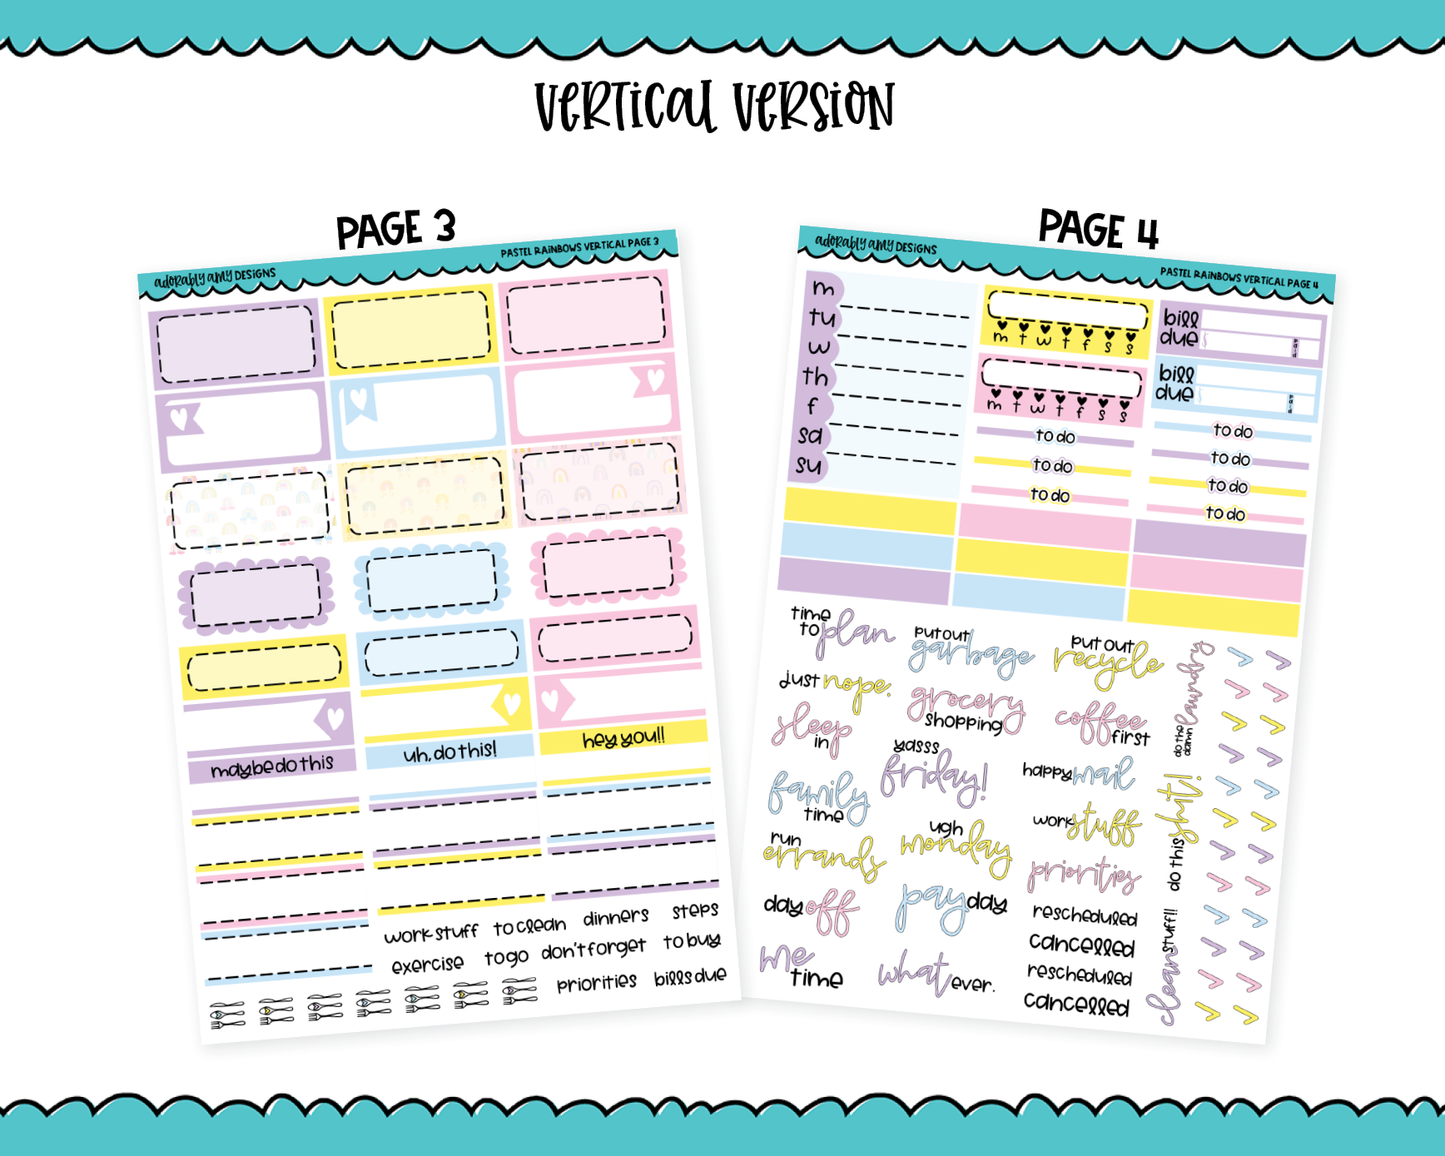 Vertical Pastel Rainbows Planner Sticker Kit for Vertical Standard Size Planners or Inserts